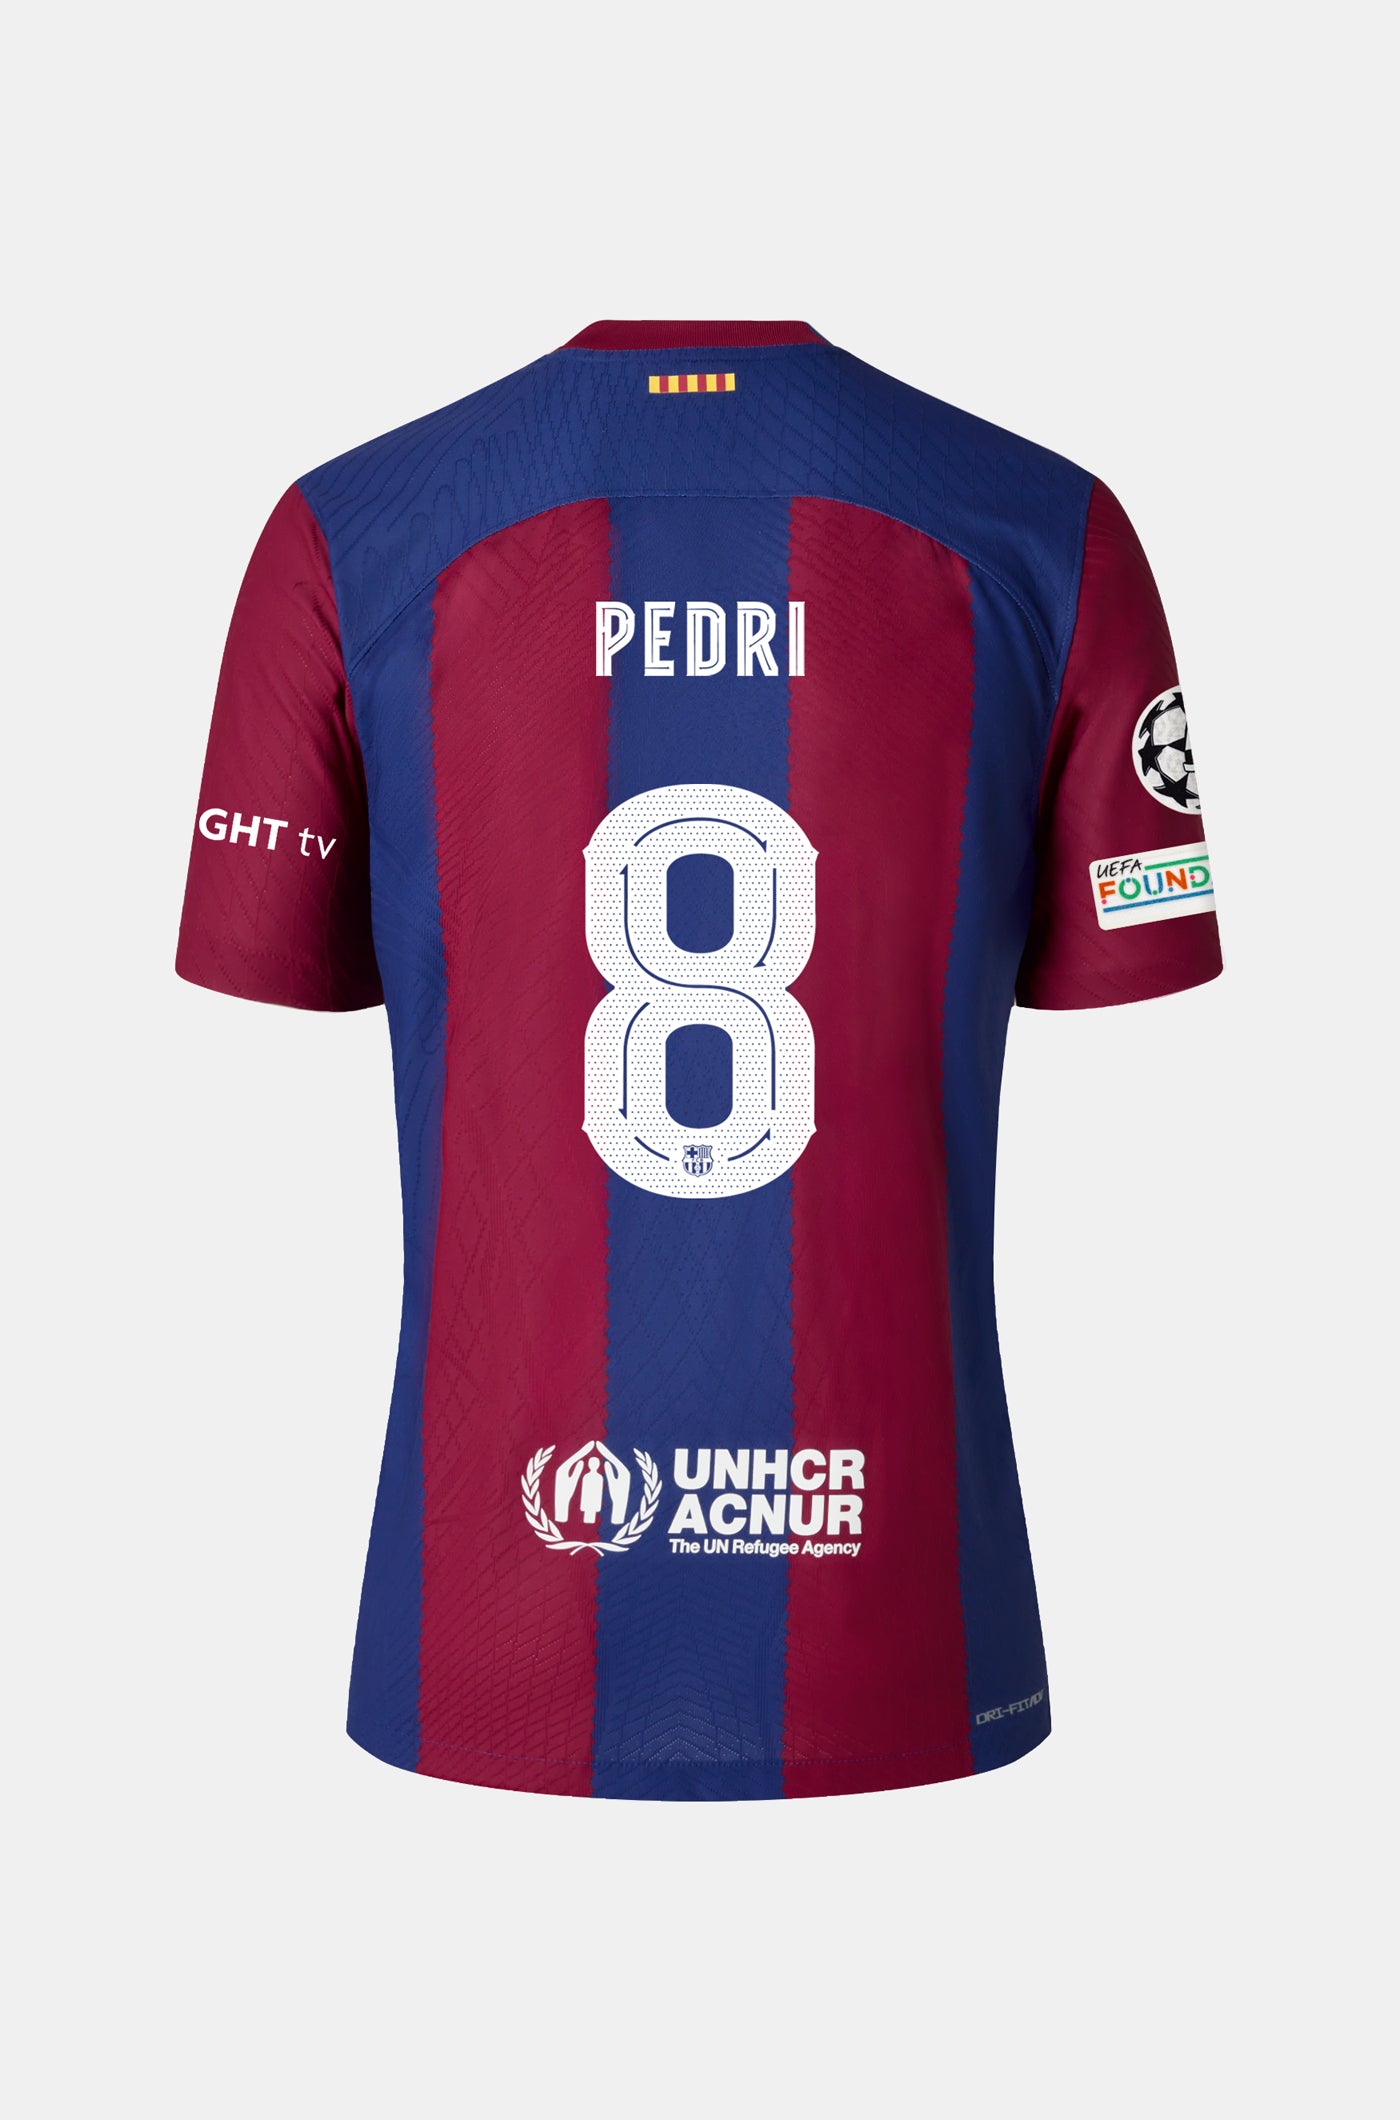 UCL FC Barcelona home jersey 23/24 Player's Edition  - PEDRI